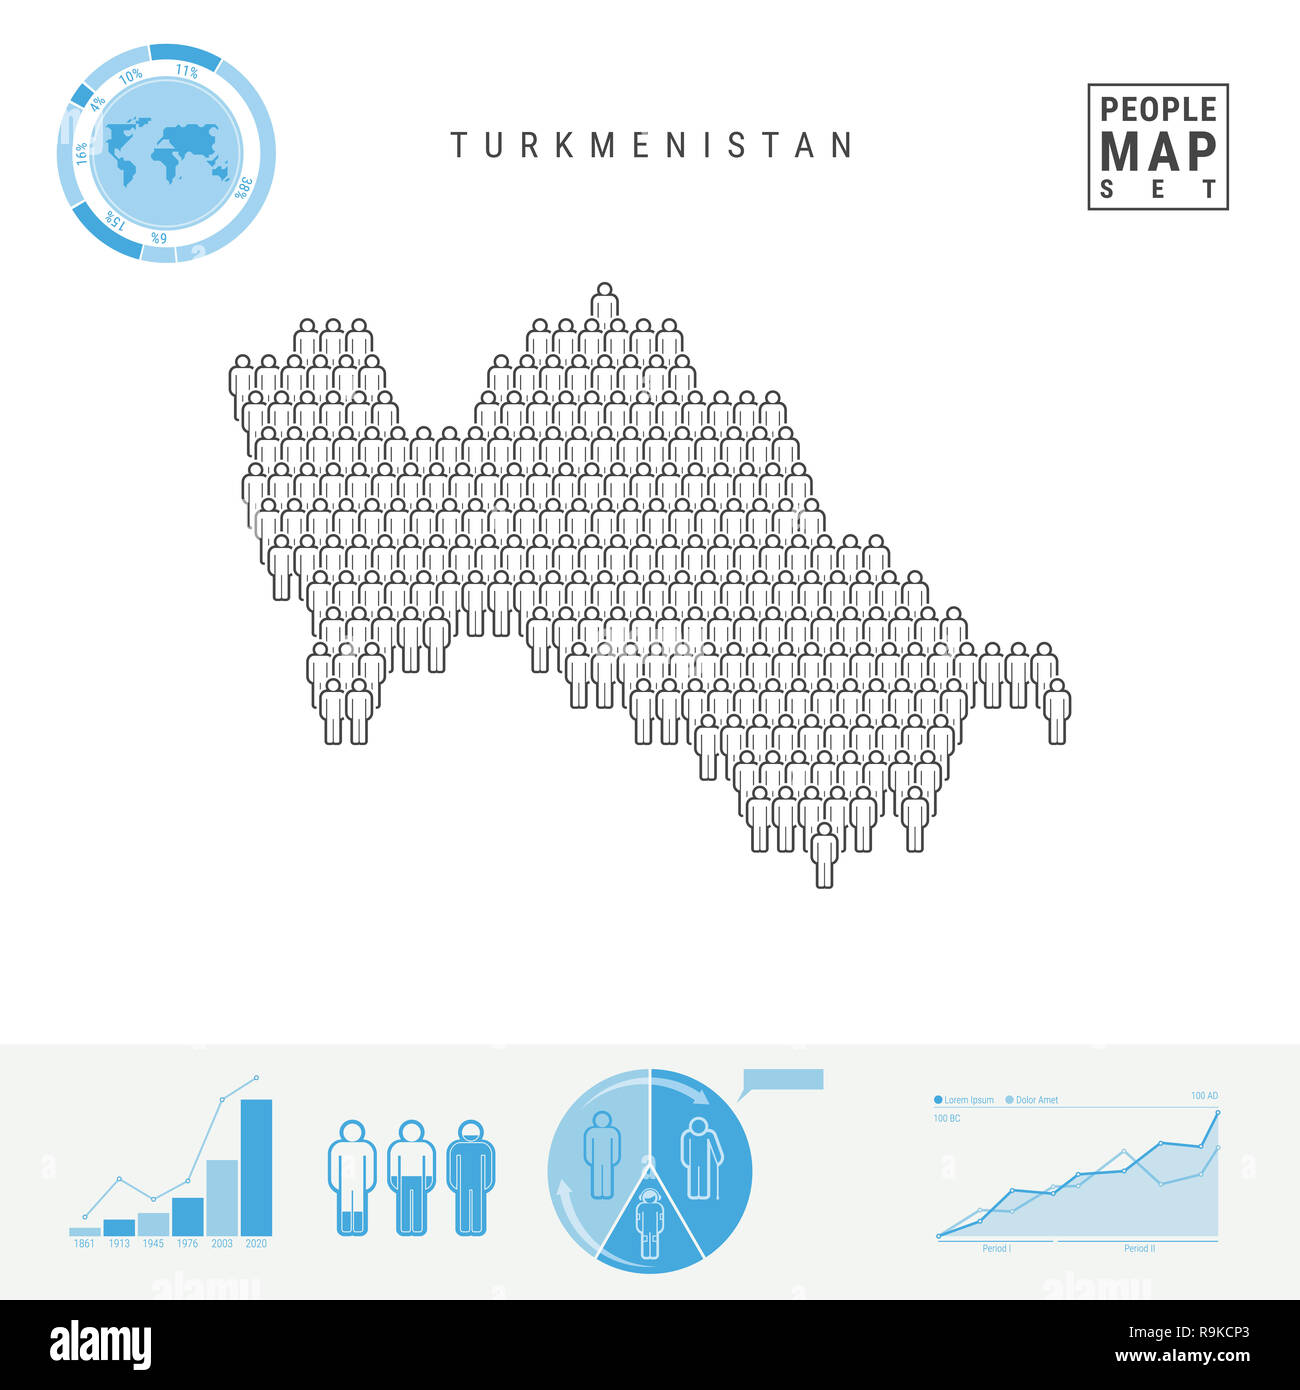 Turkmenistan People Icon Map. People Crowd in the Shape of a Map of Turkmenistan. Stylized Silhouette of Turkmenistan. Population Growth and Aging Inf Stock Photo